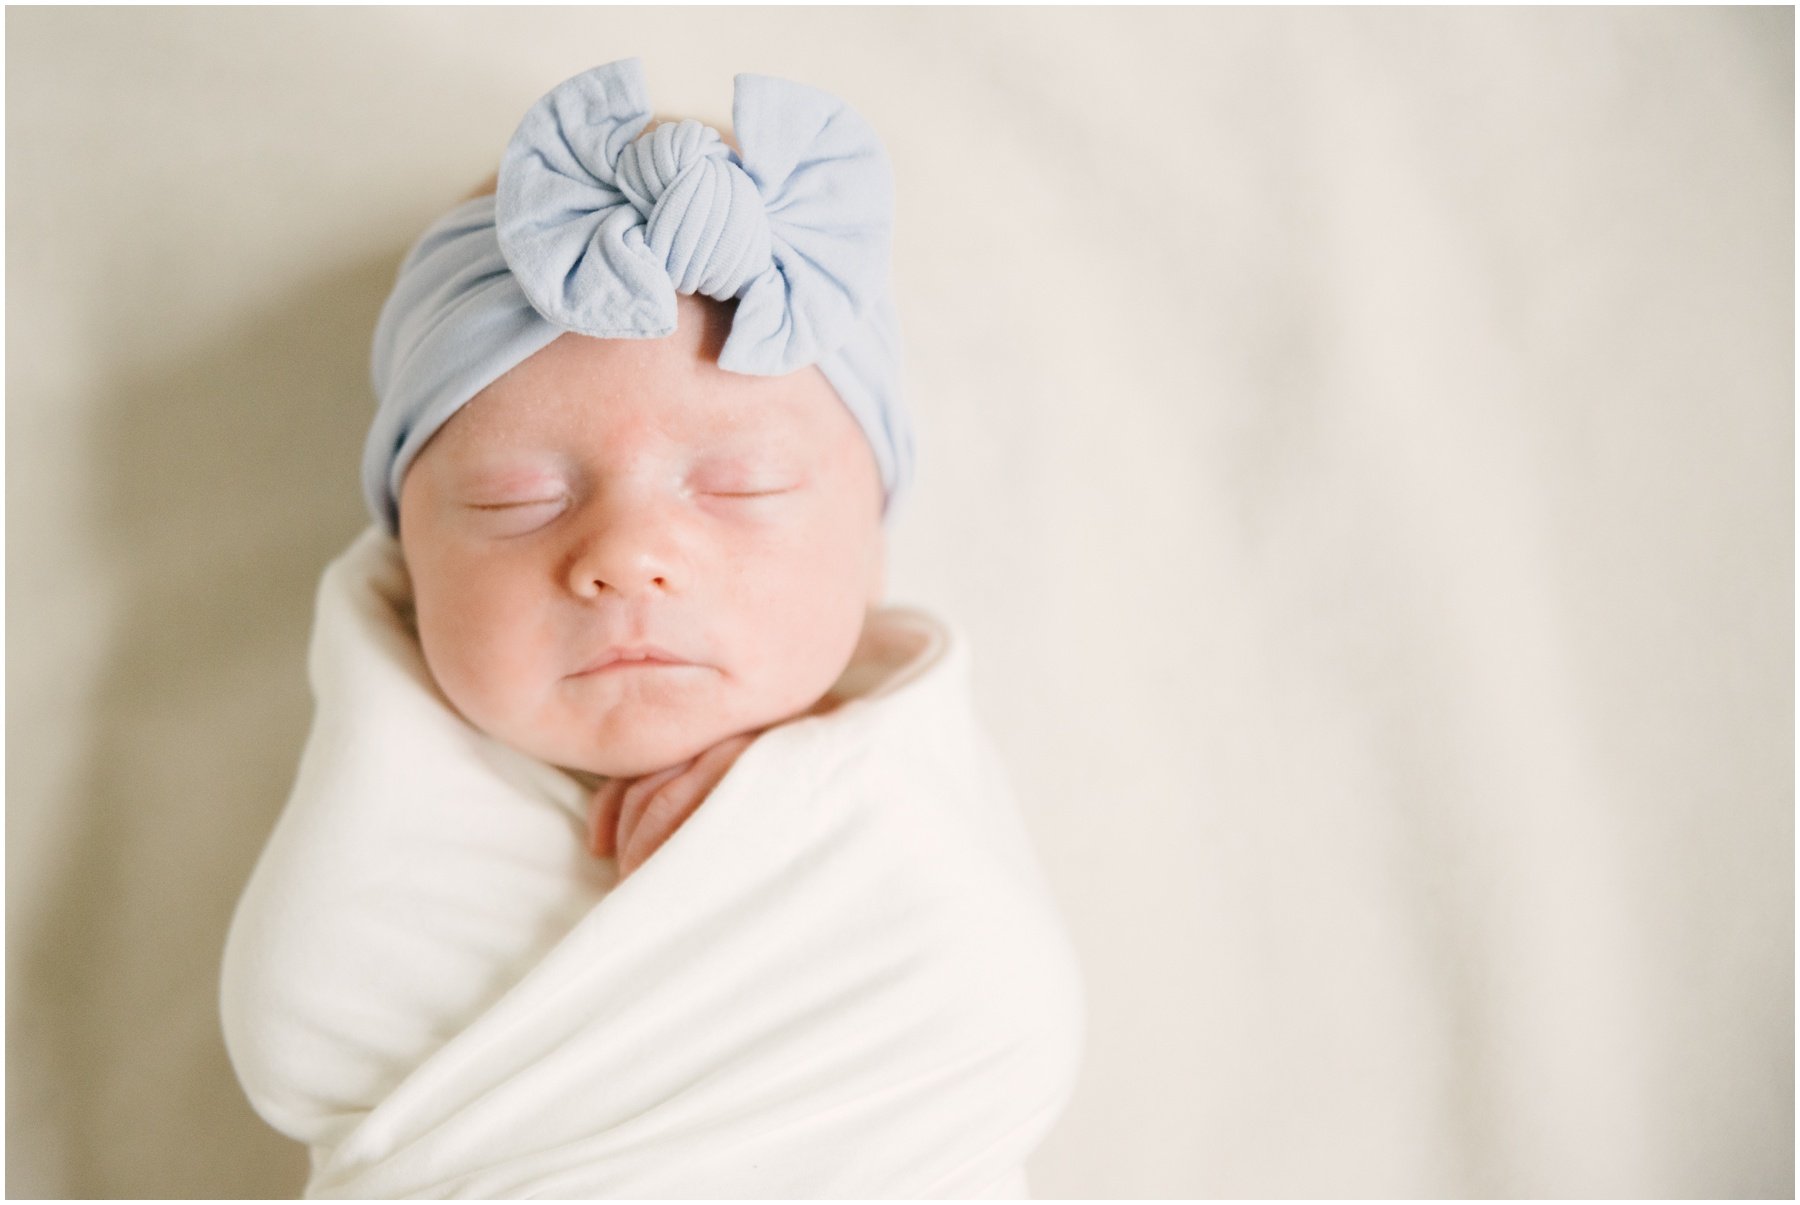 Baby swaddled with turban on during newborn session | NKB Photo